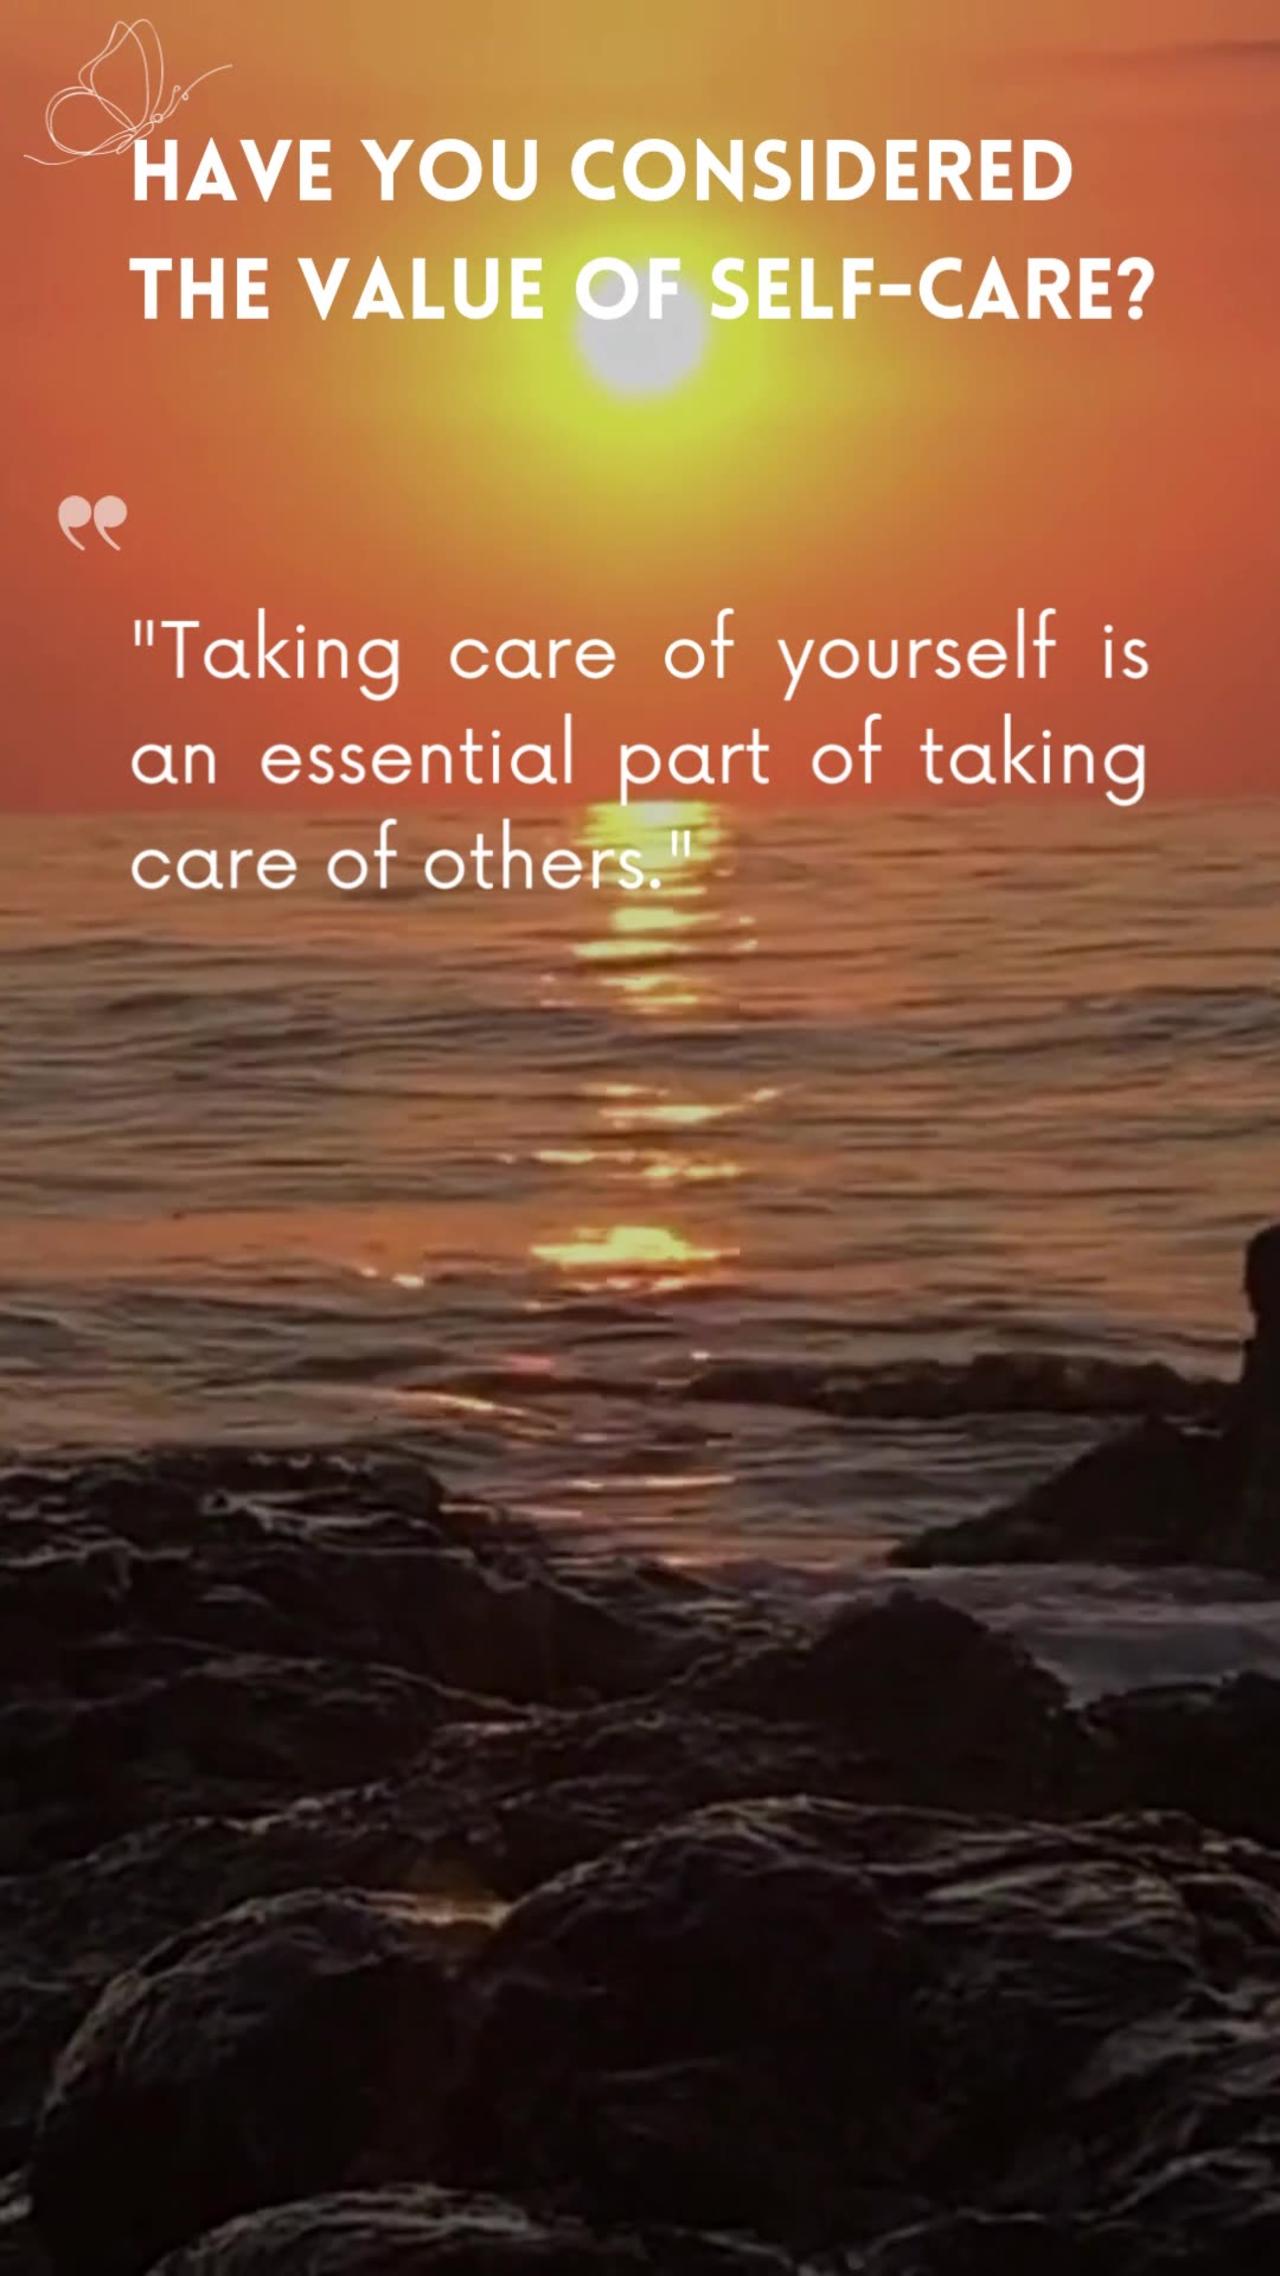 Have you considered the value of self-care?